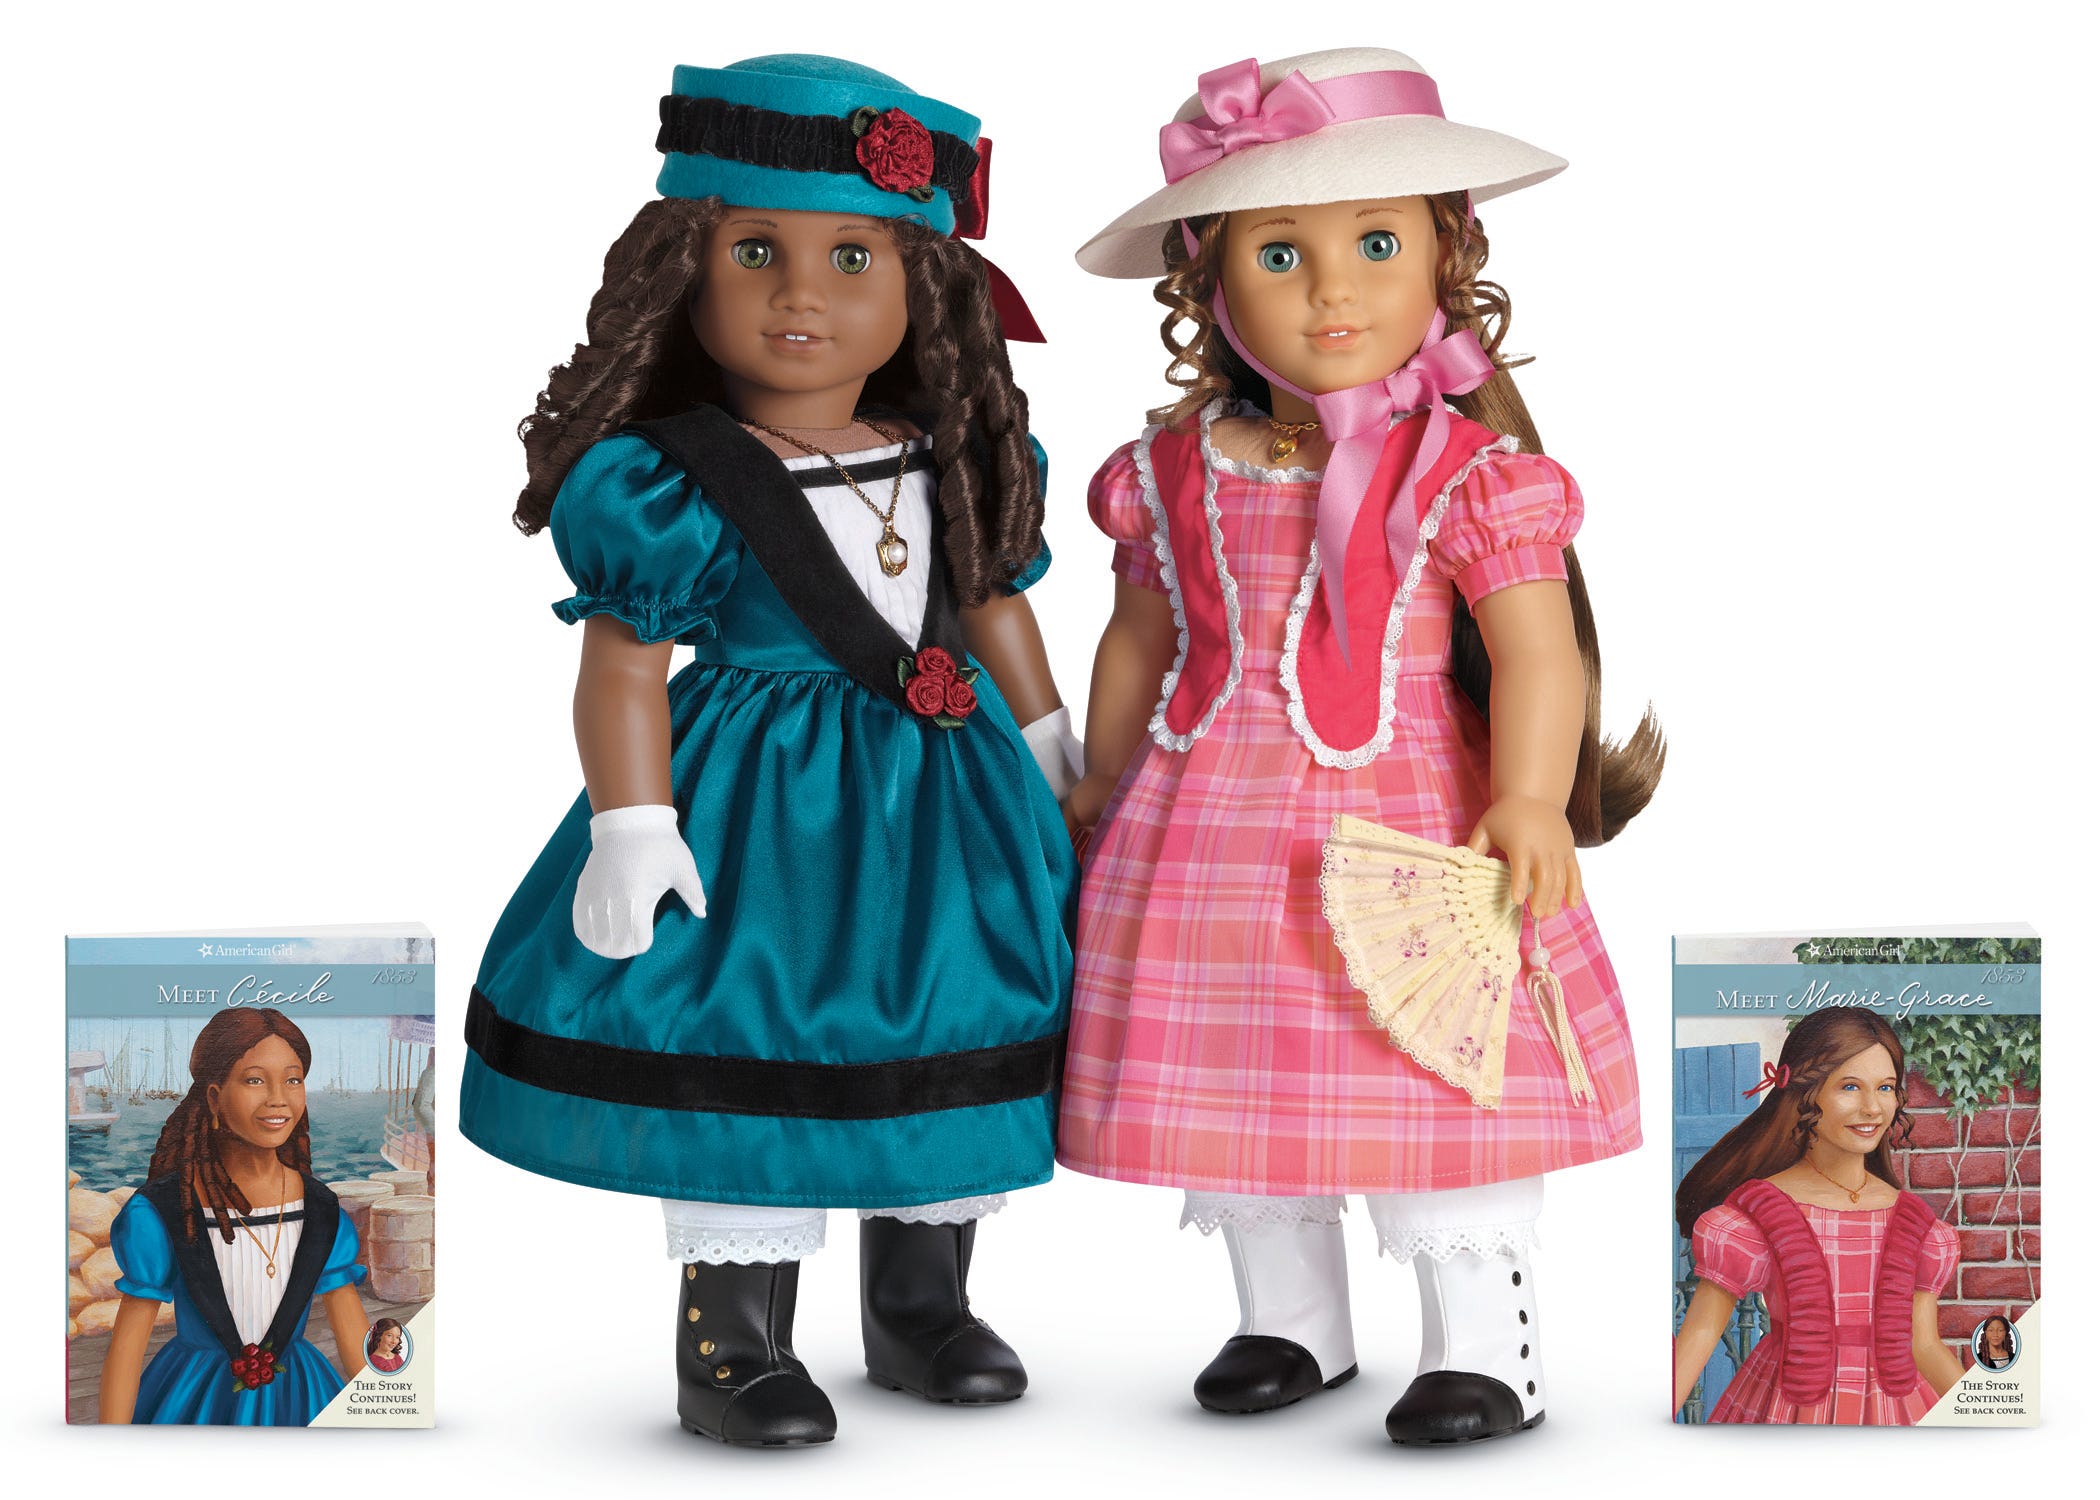 all the american girl dolls in the world